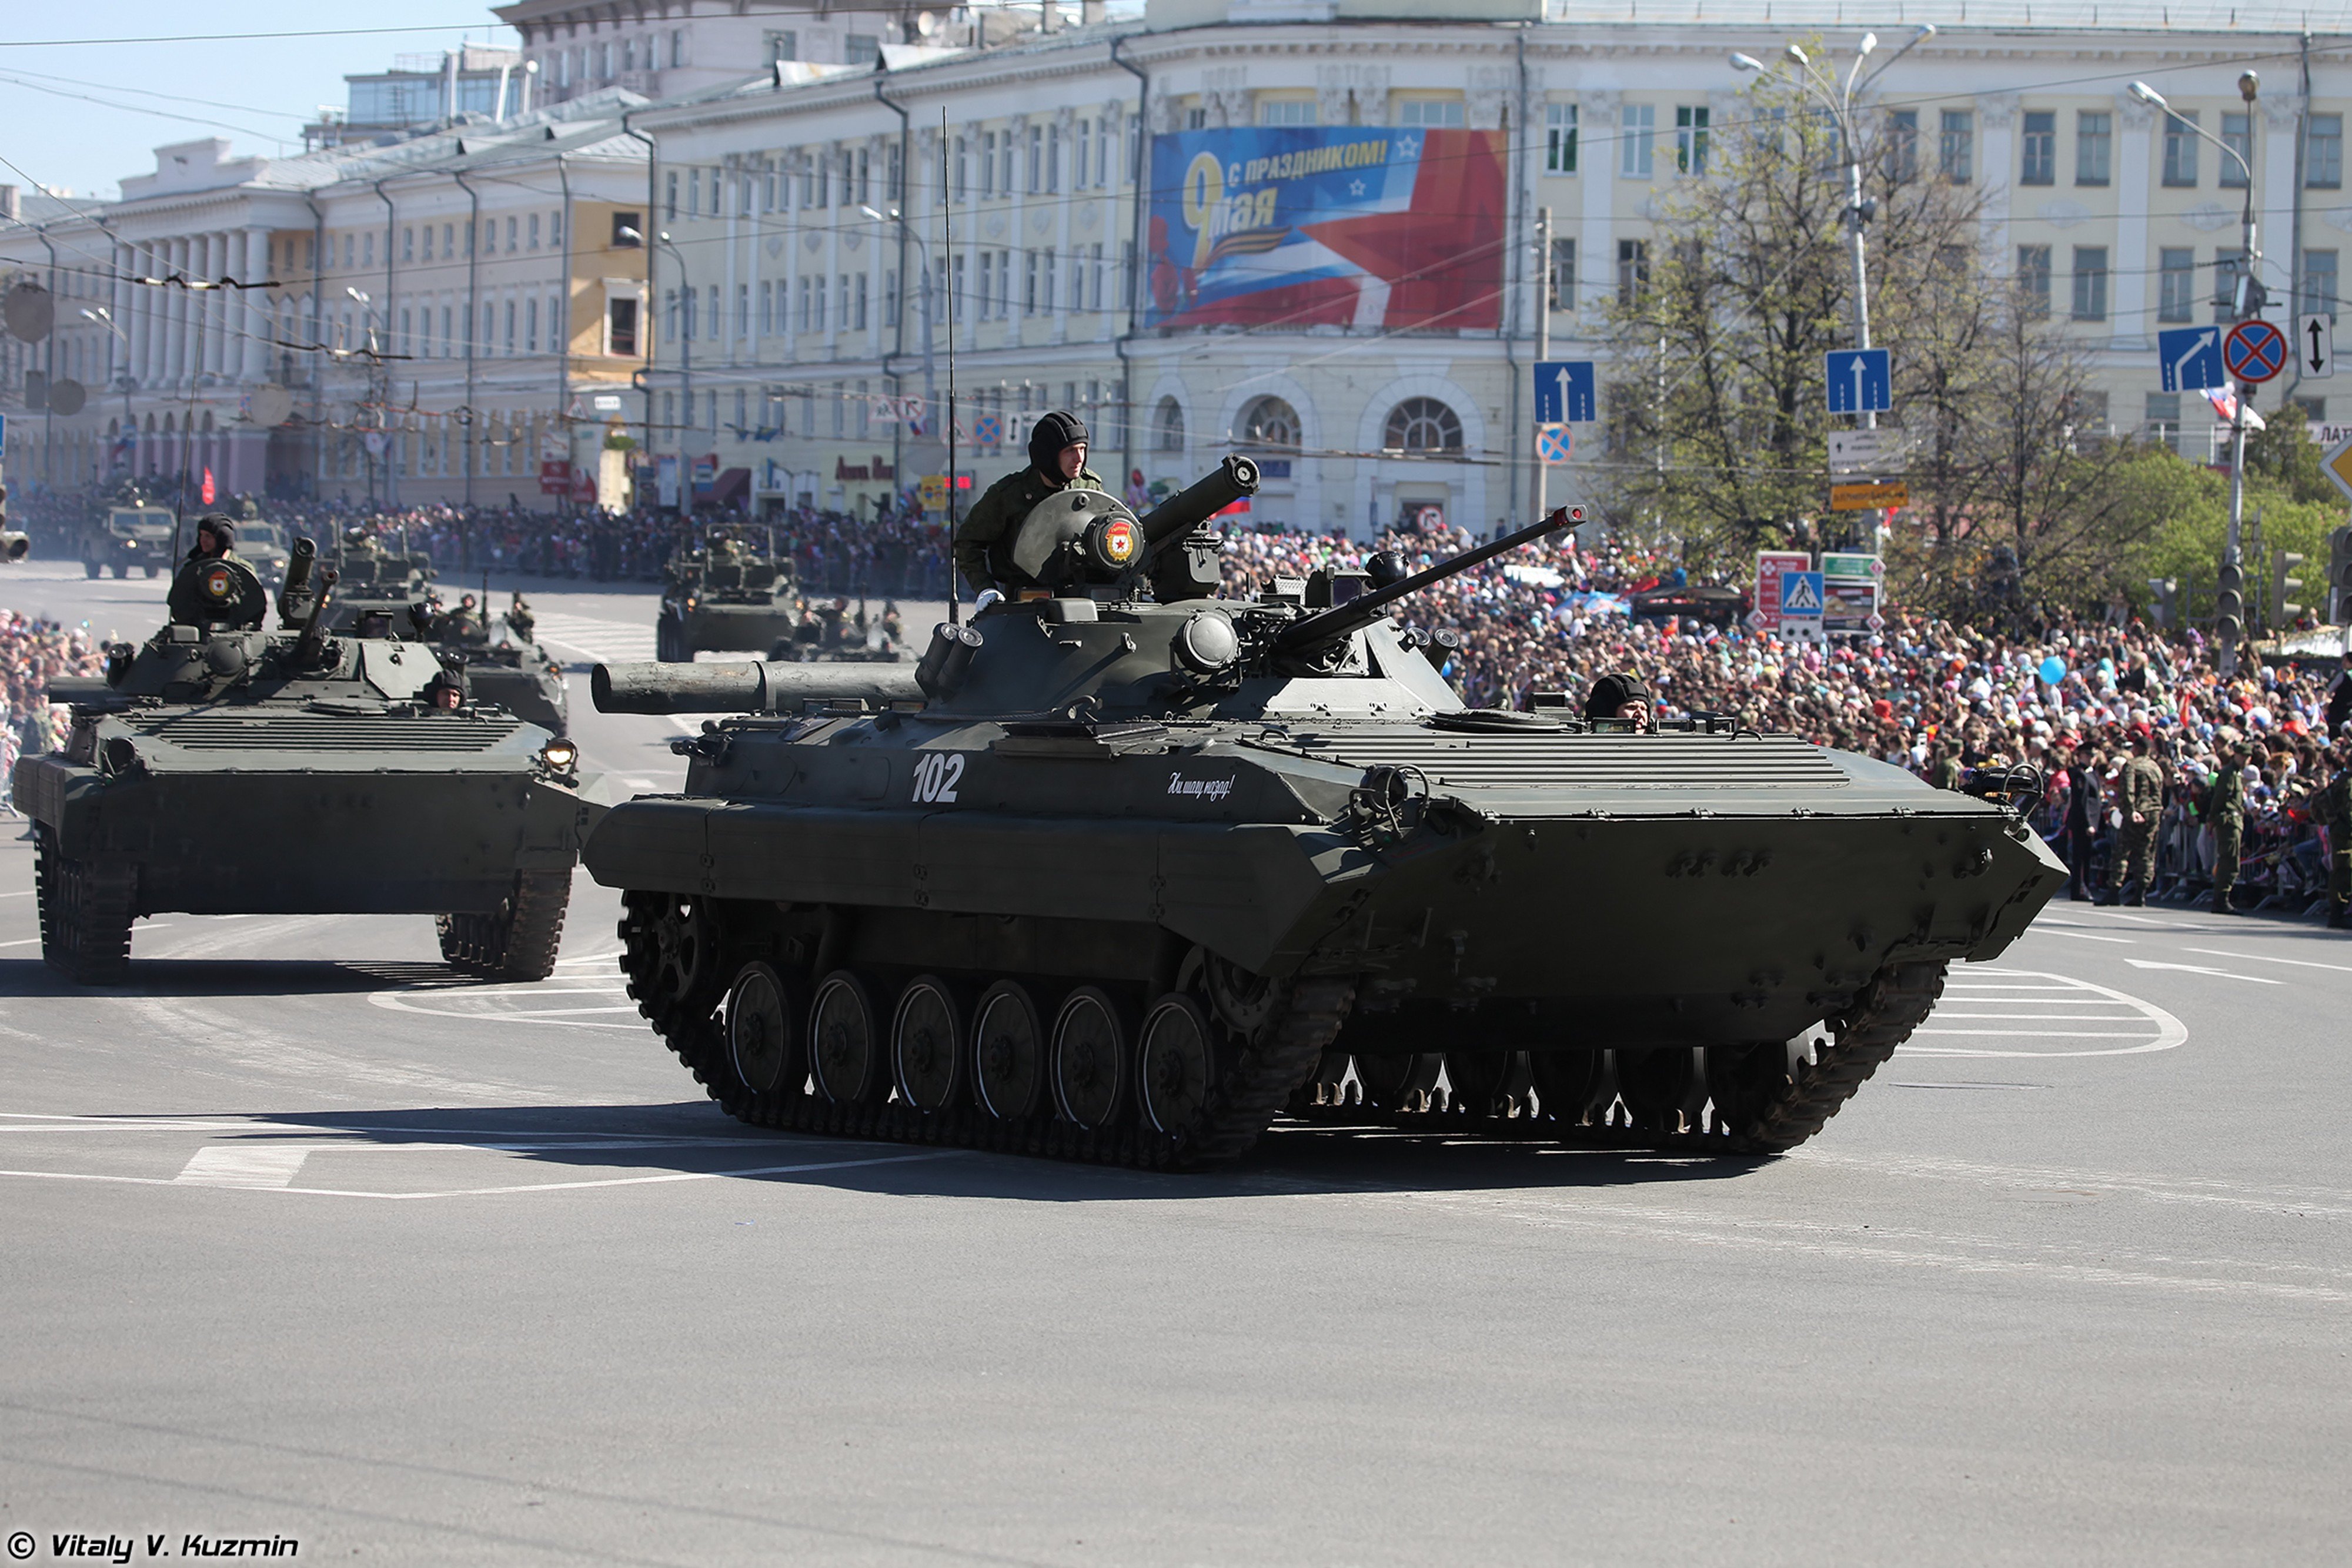 2014, Victory, Day, Parade in nizhny novgorod, Russia, Military, Russian, Army, Red star, Armored, Bmp 2, Ifv, 3, 4000x2667 Wallpaper